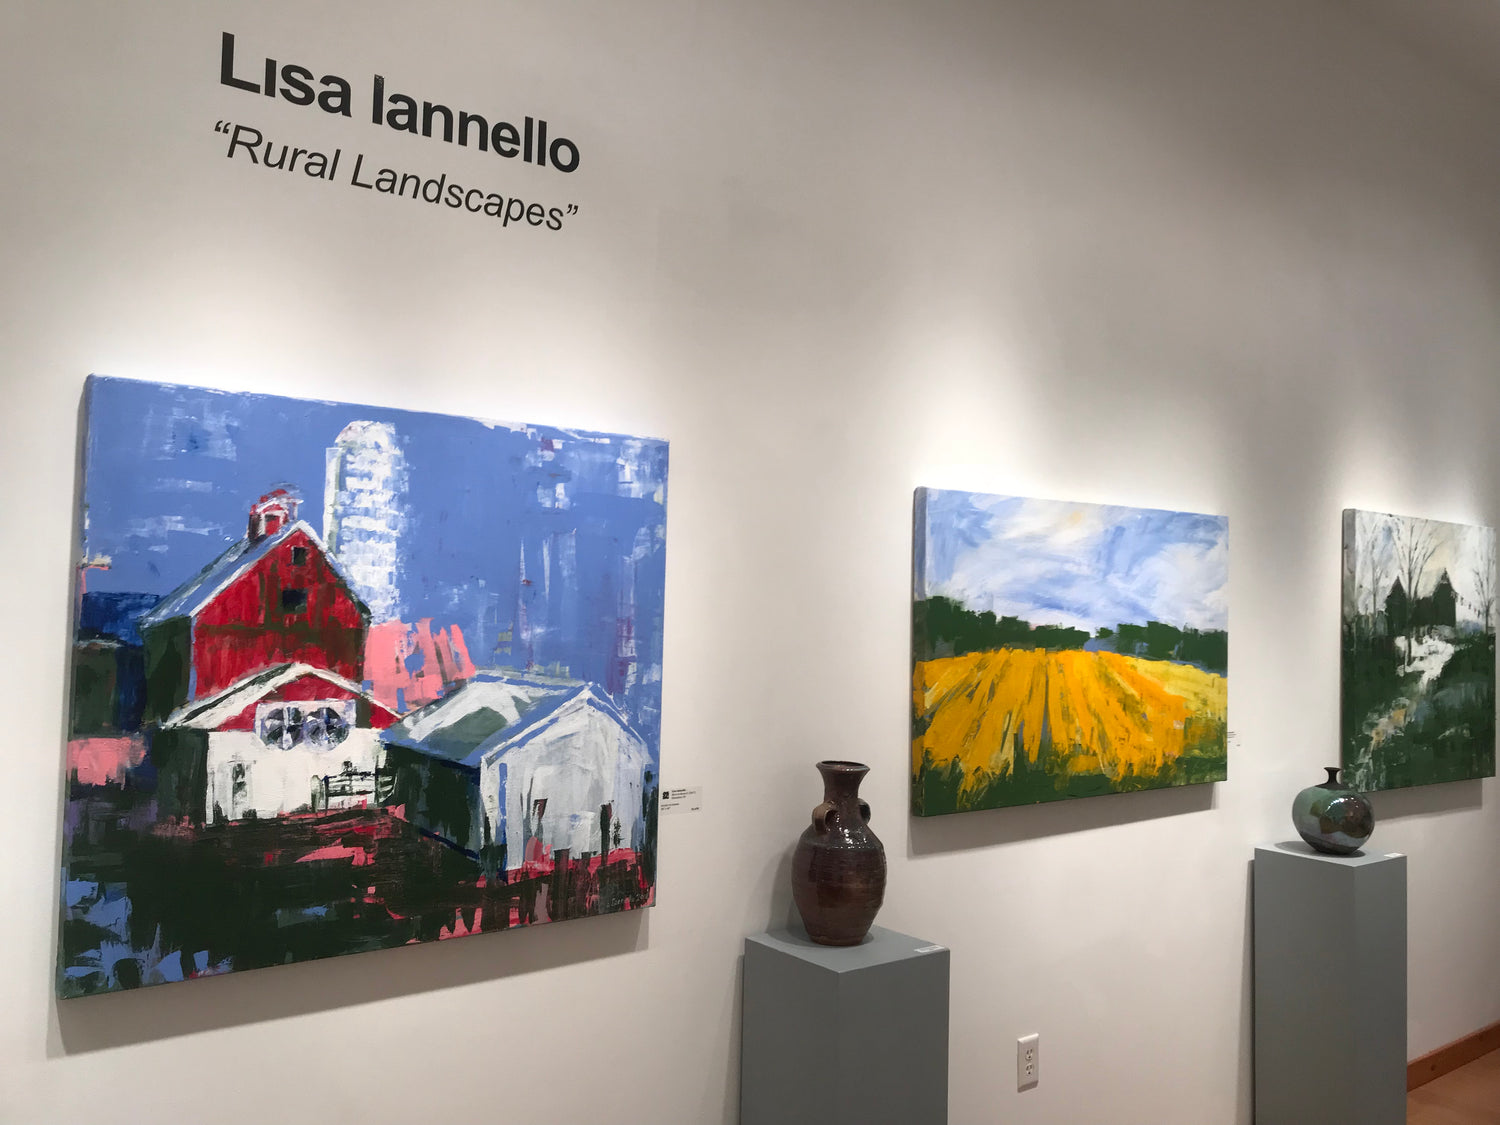 Lisa Iannello art gallery exhibit titled, "Rural Landscapes".